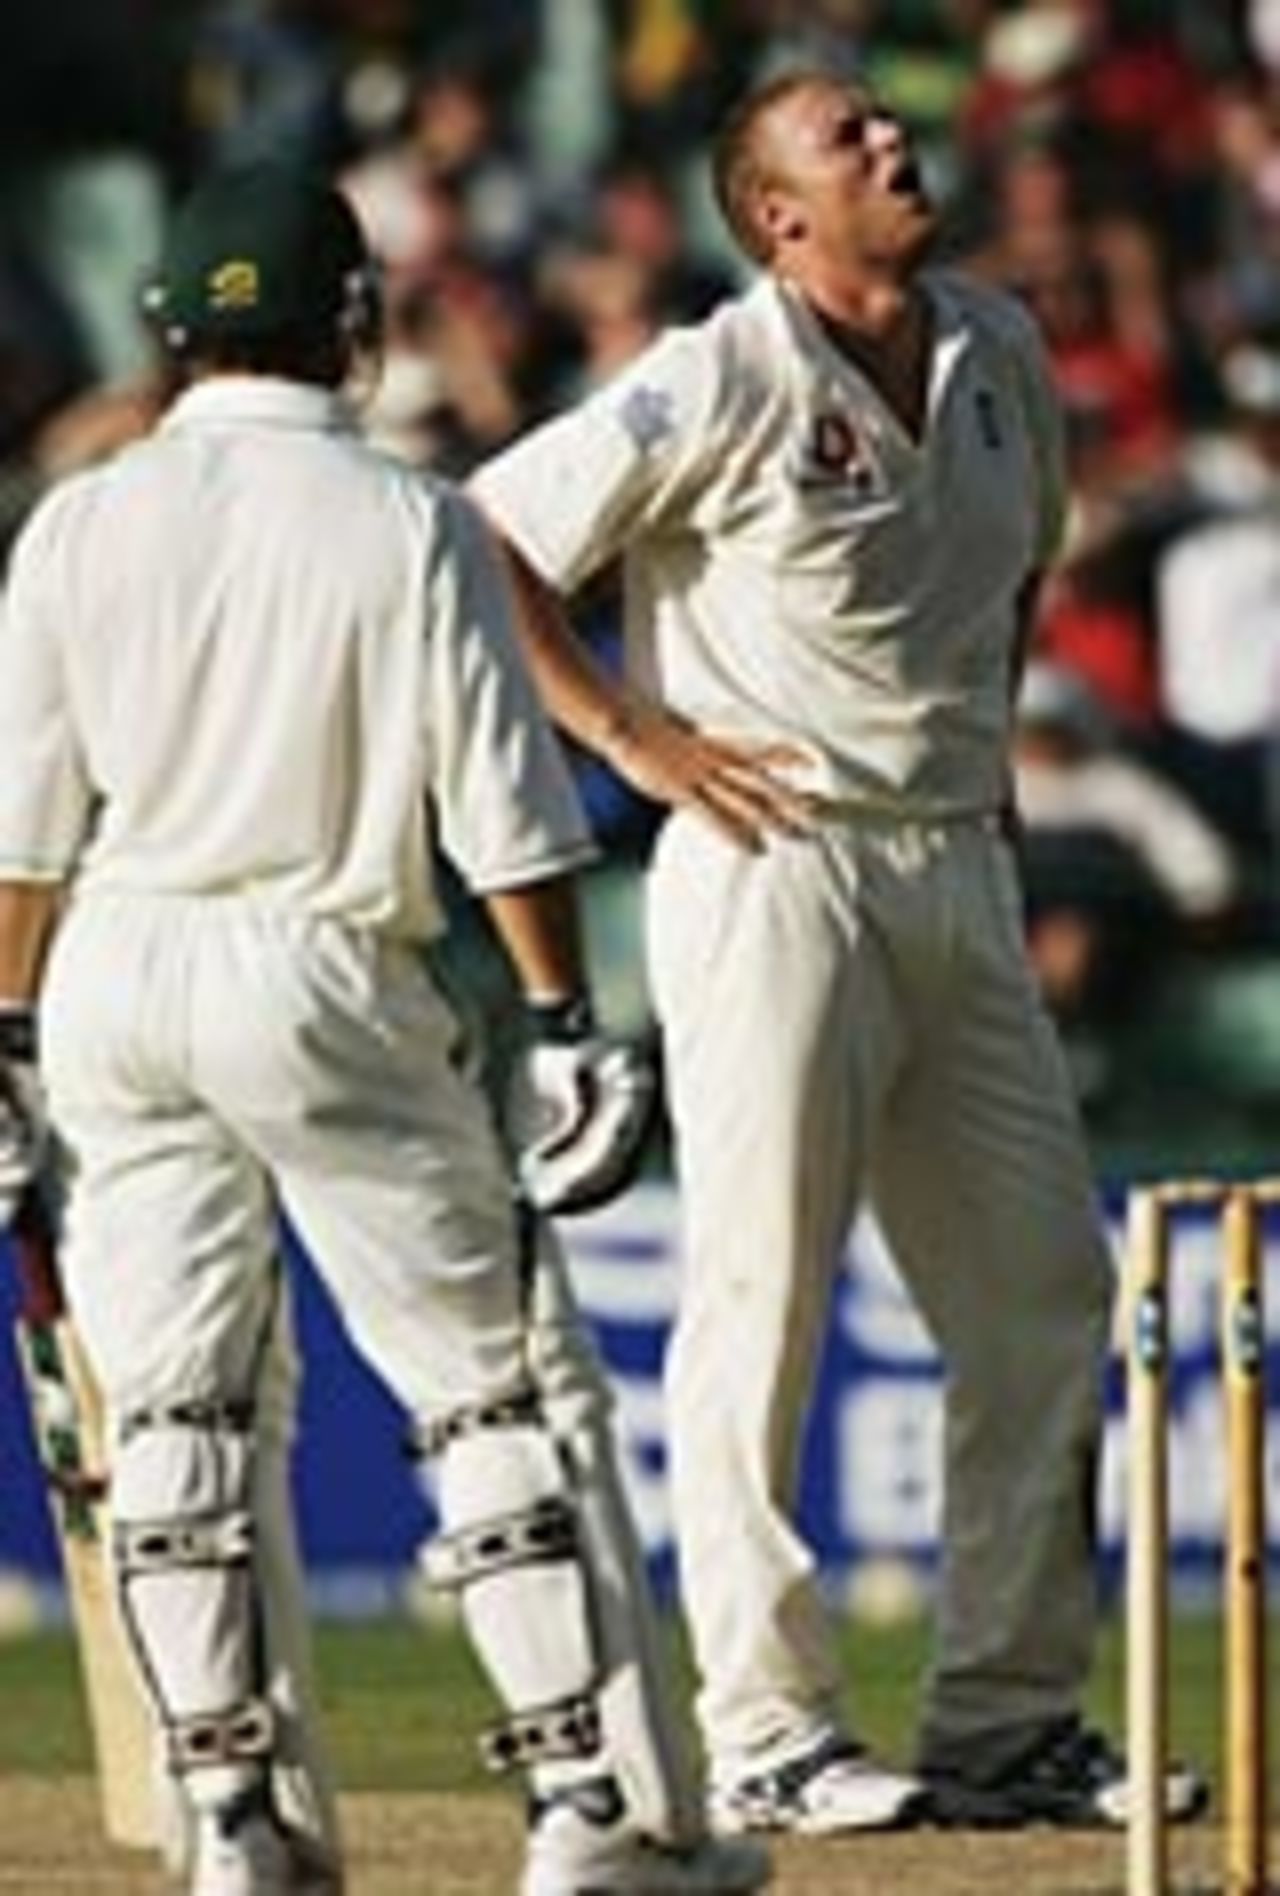 Andrew Flintoff shows his frustration, South Africa v England, 4th Test, Jo'burg, 3rd day, January 15 2005